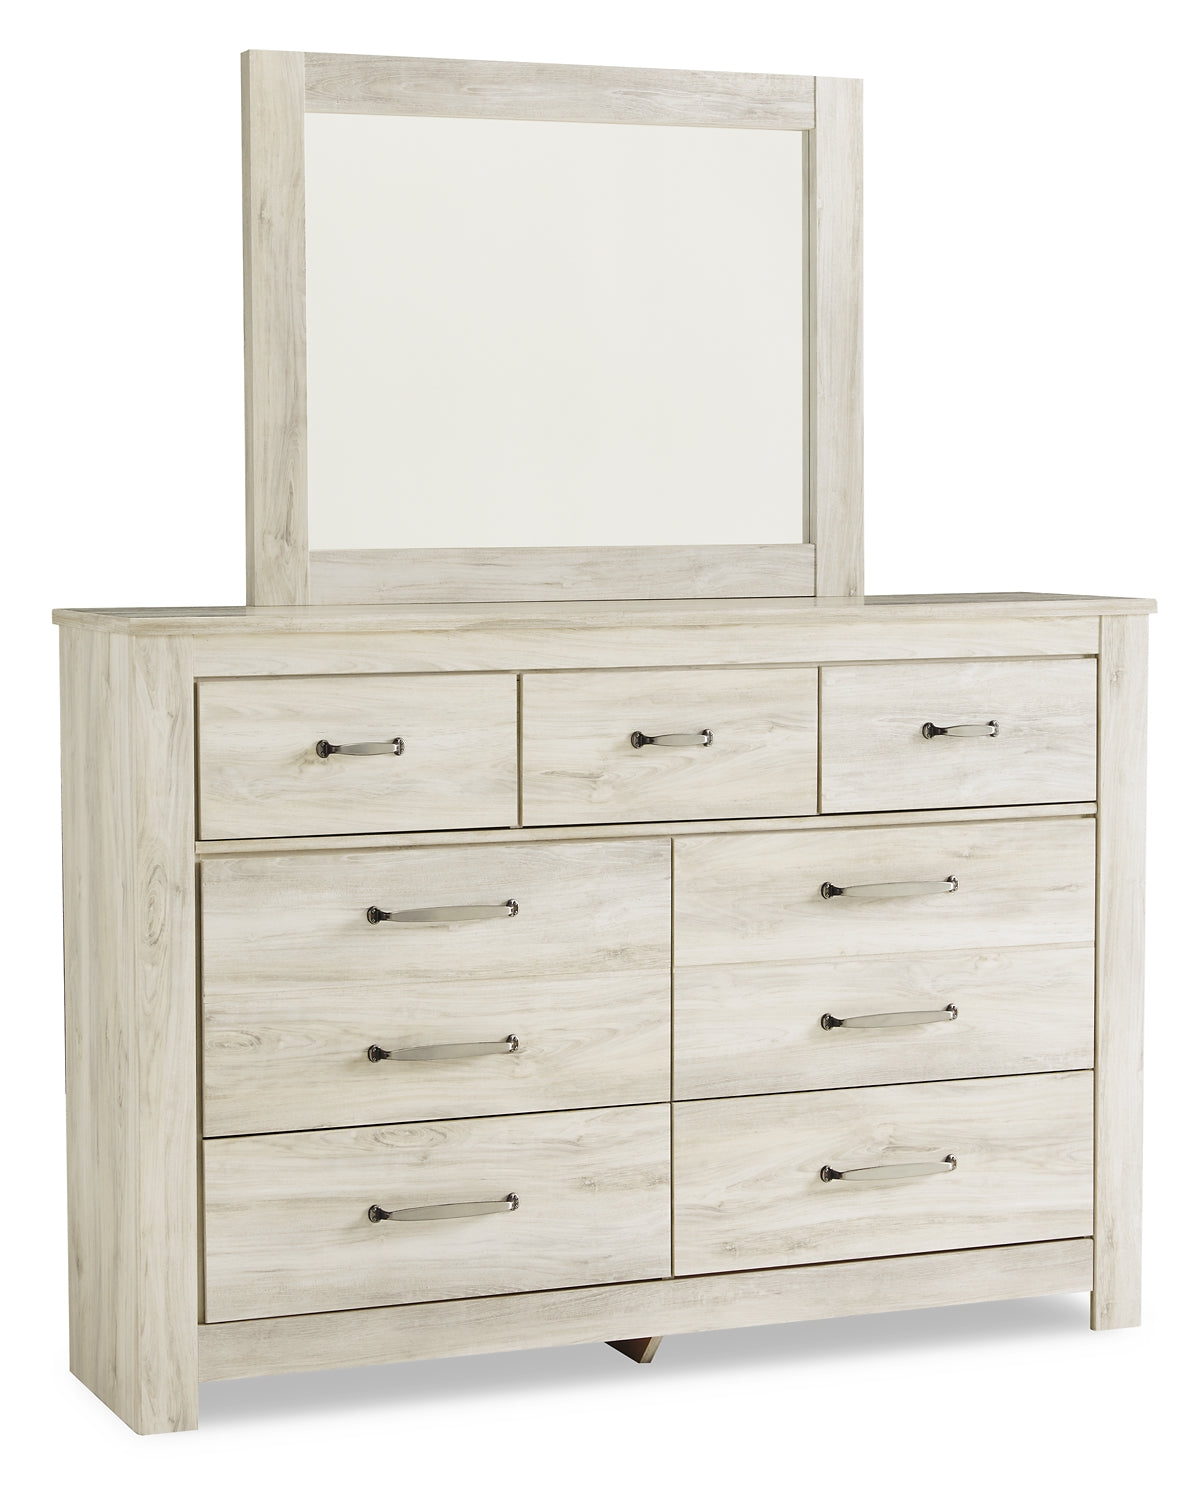 Bellaby Queen Crossbuck Panel Bed with Mirrored Dresser, Chest and Nightstand JB's Furniture  Home Furniture, Home Decor, Furniture Store